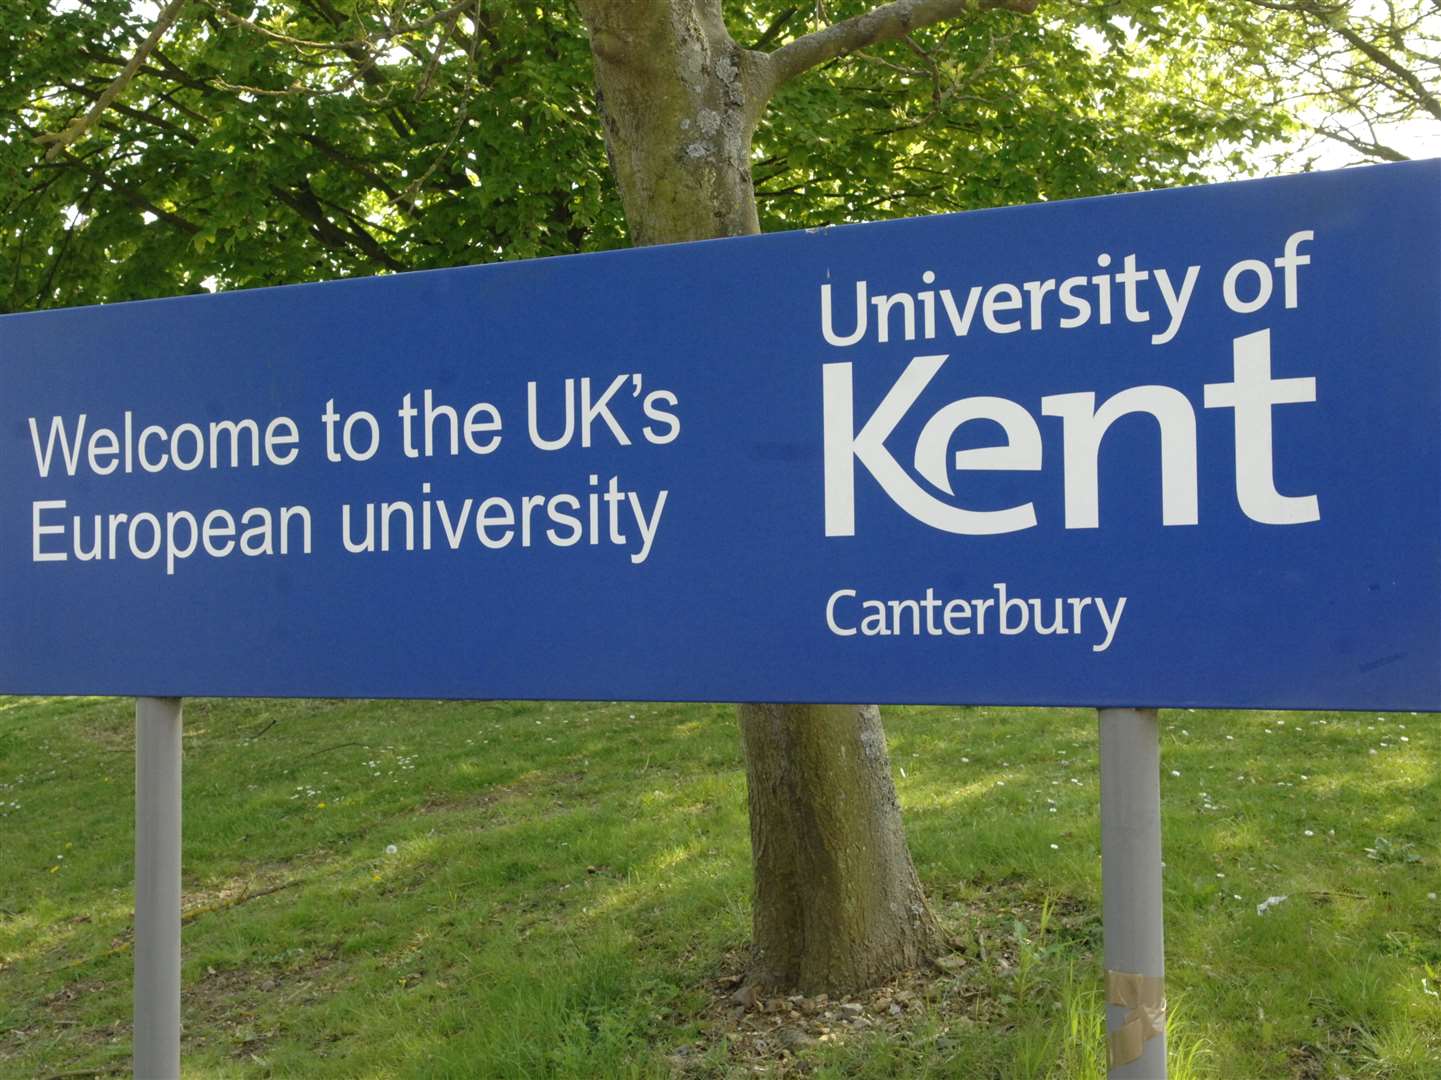 Academics from the University of Kent have rapped out a warning over workplace safety